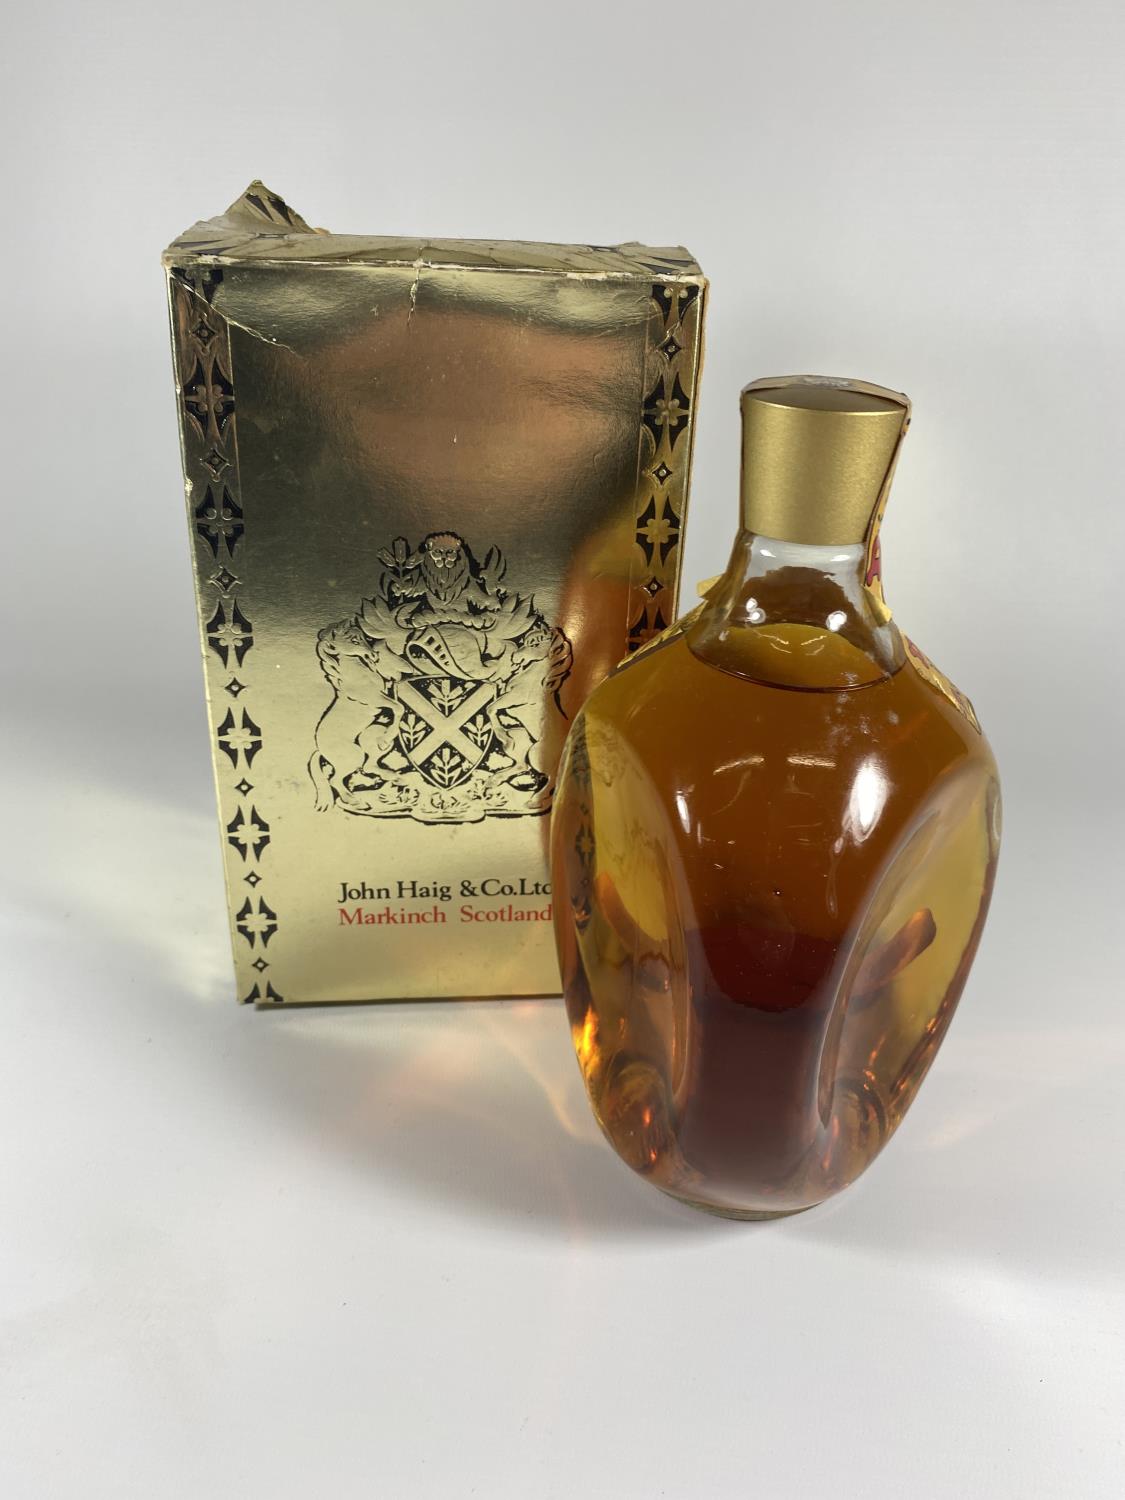 A BOXED DIMPLE DE LUXE SCOTCH WHISKY 70 PROOF 26 2/3 FL.OZS. PROCEEDS TO BE DONATED TO EAST CHESHIRE - Image 3 of 3